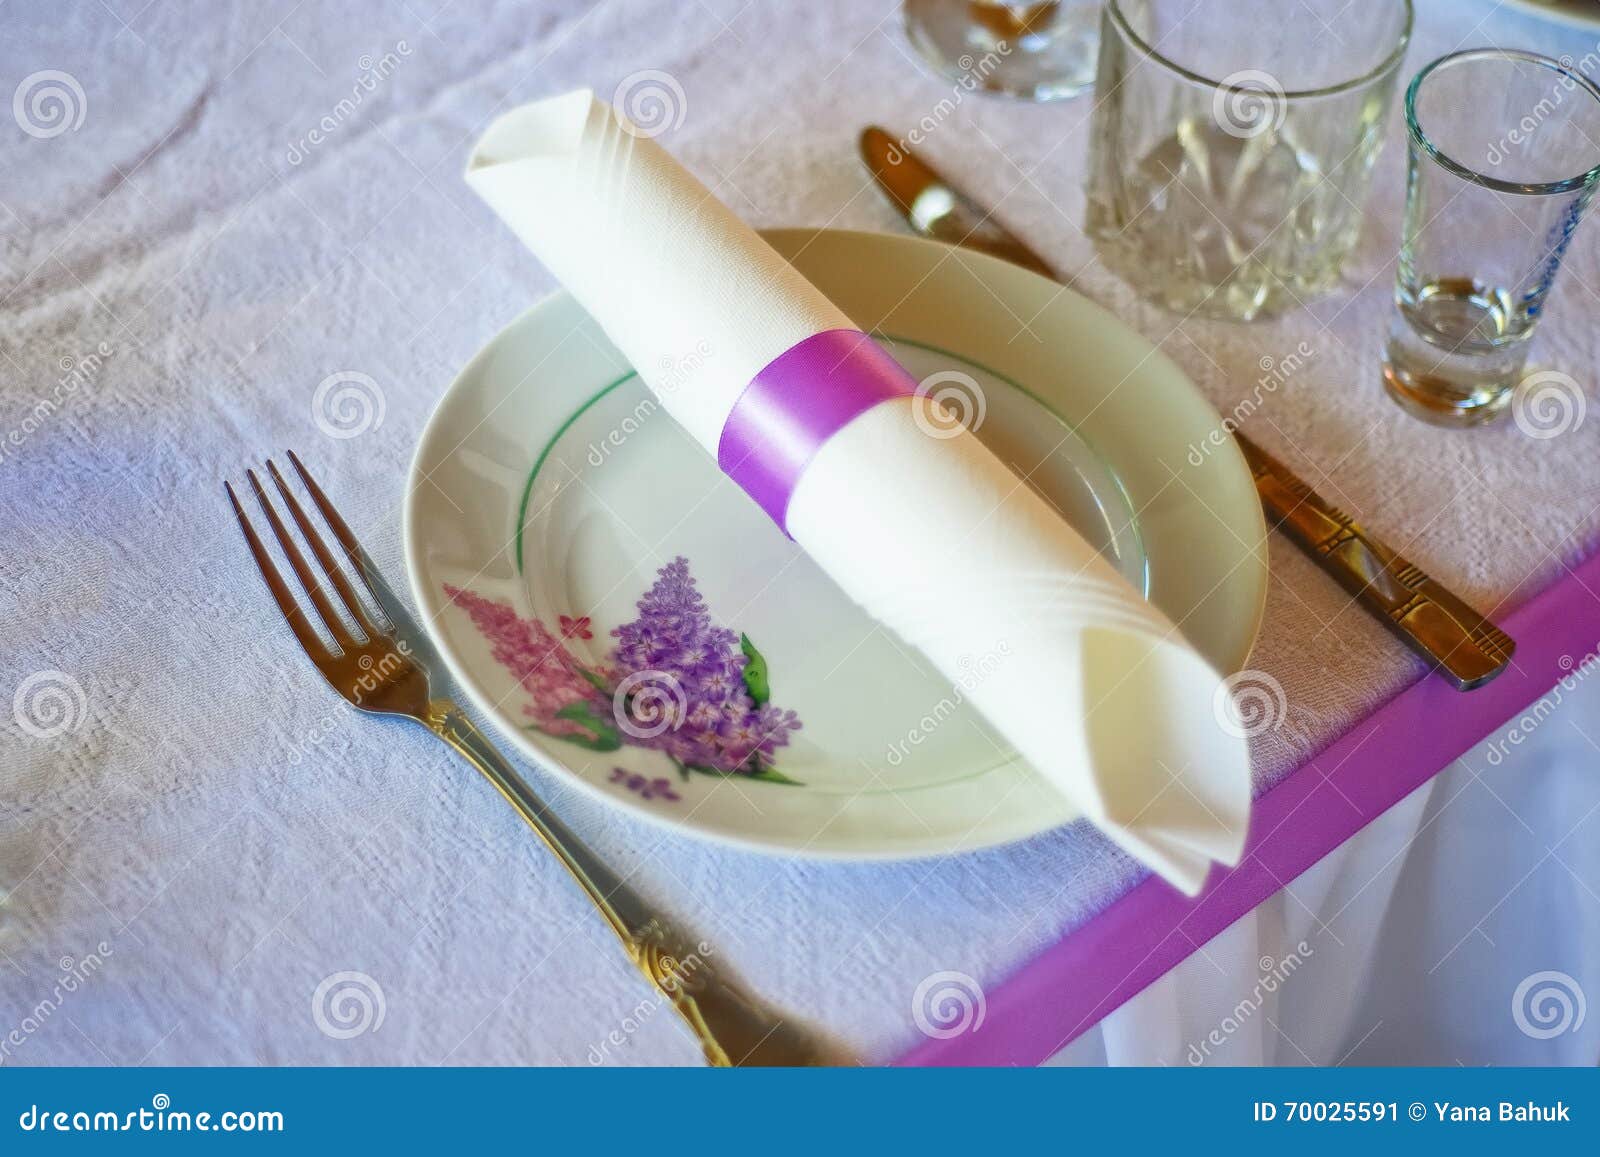 table setting for fine dining or party. cutlery and plate inrestaurant set up for wedding celebration